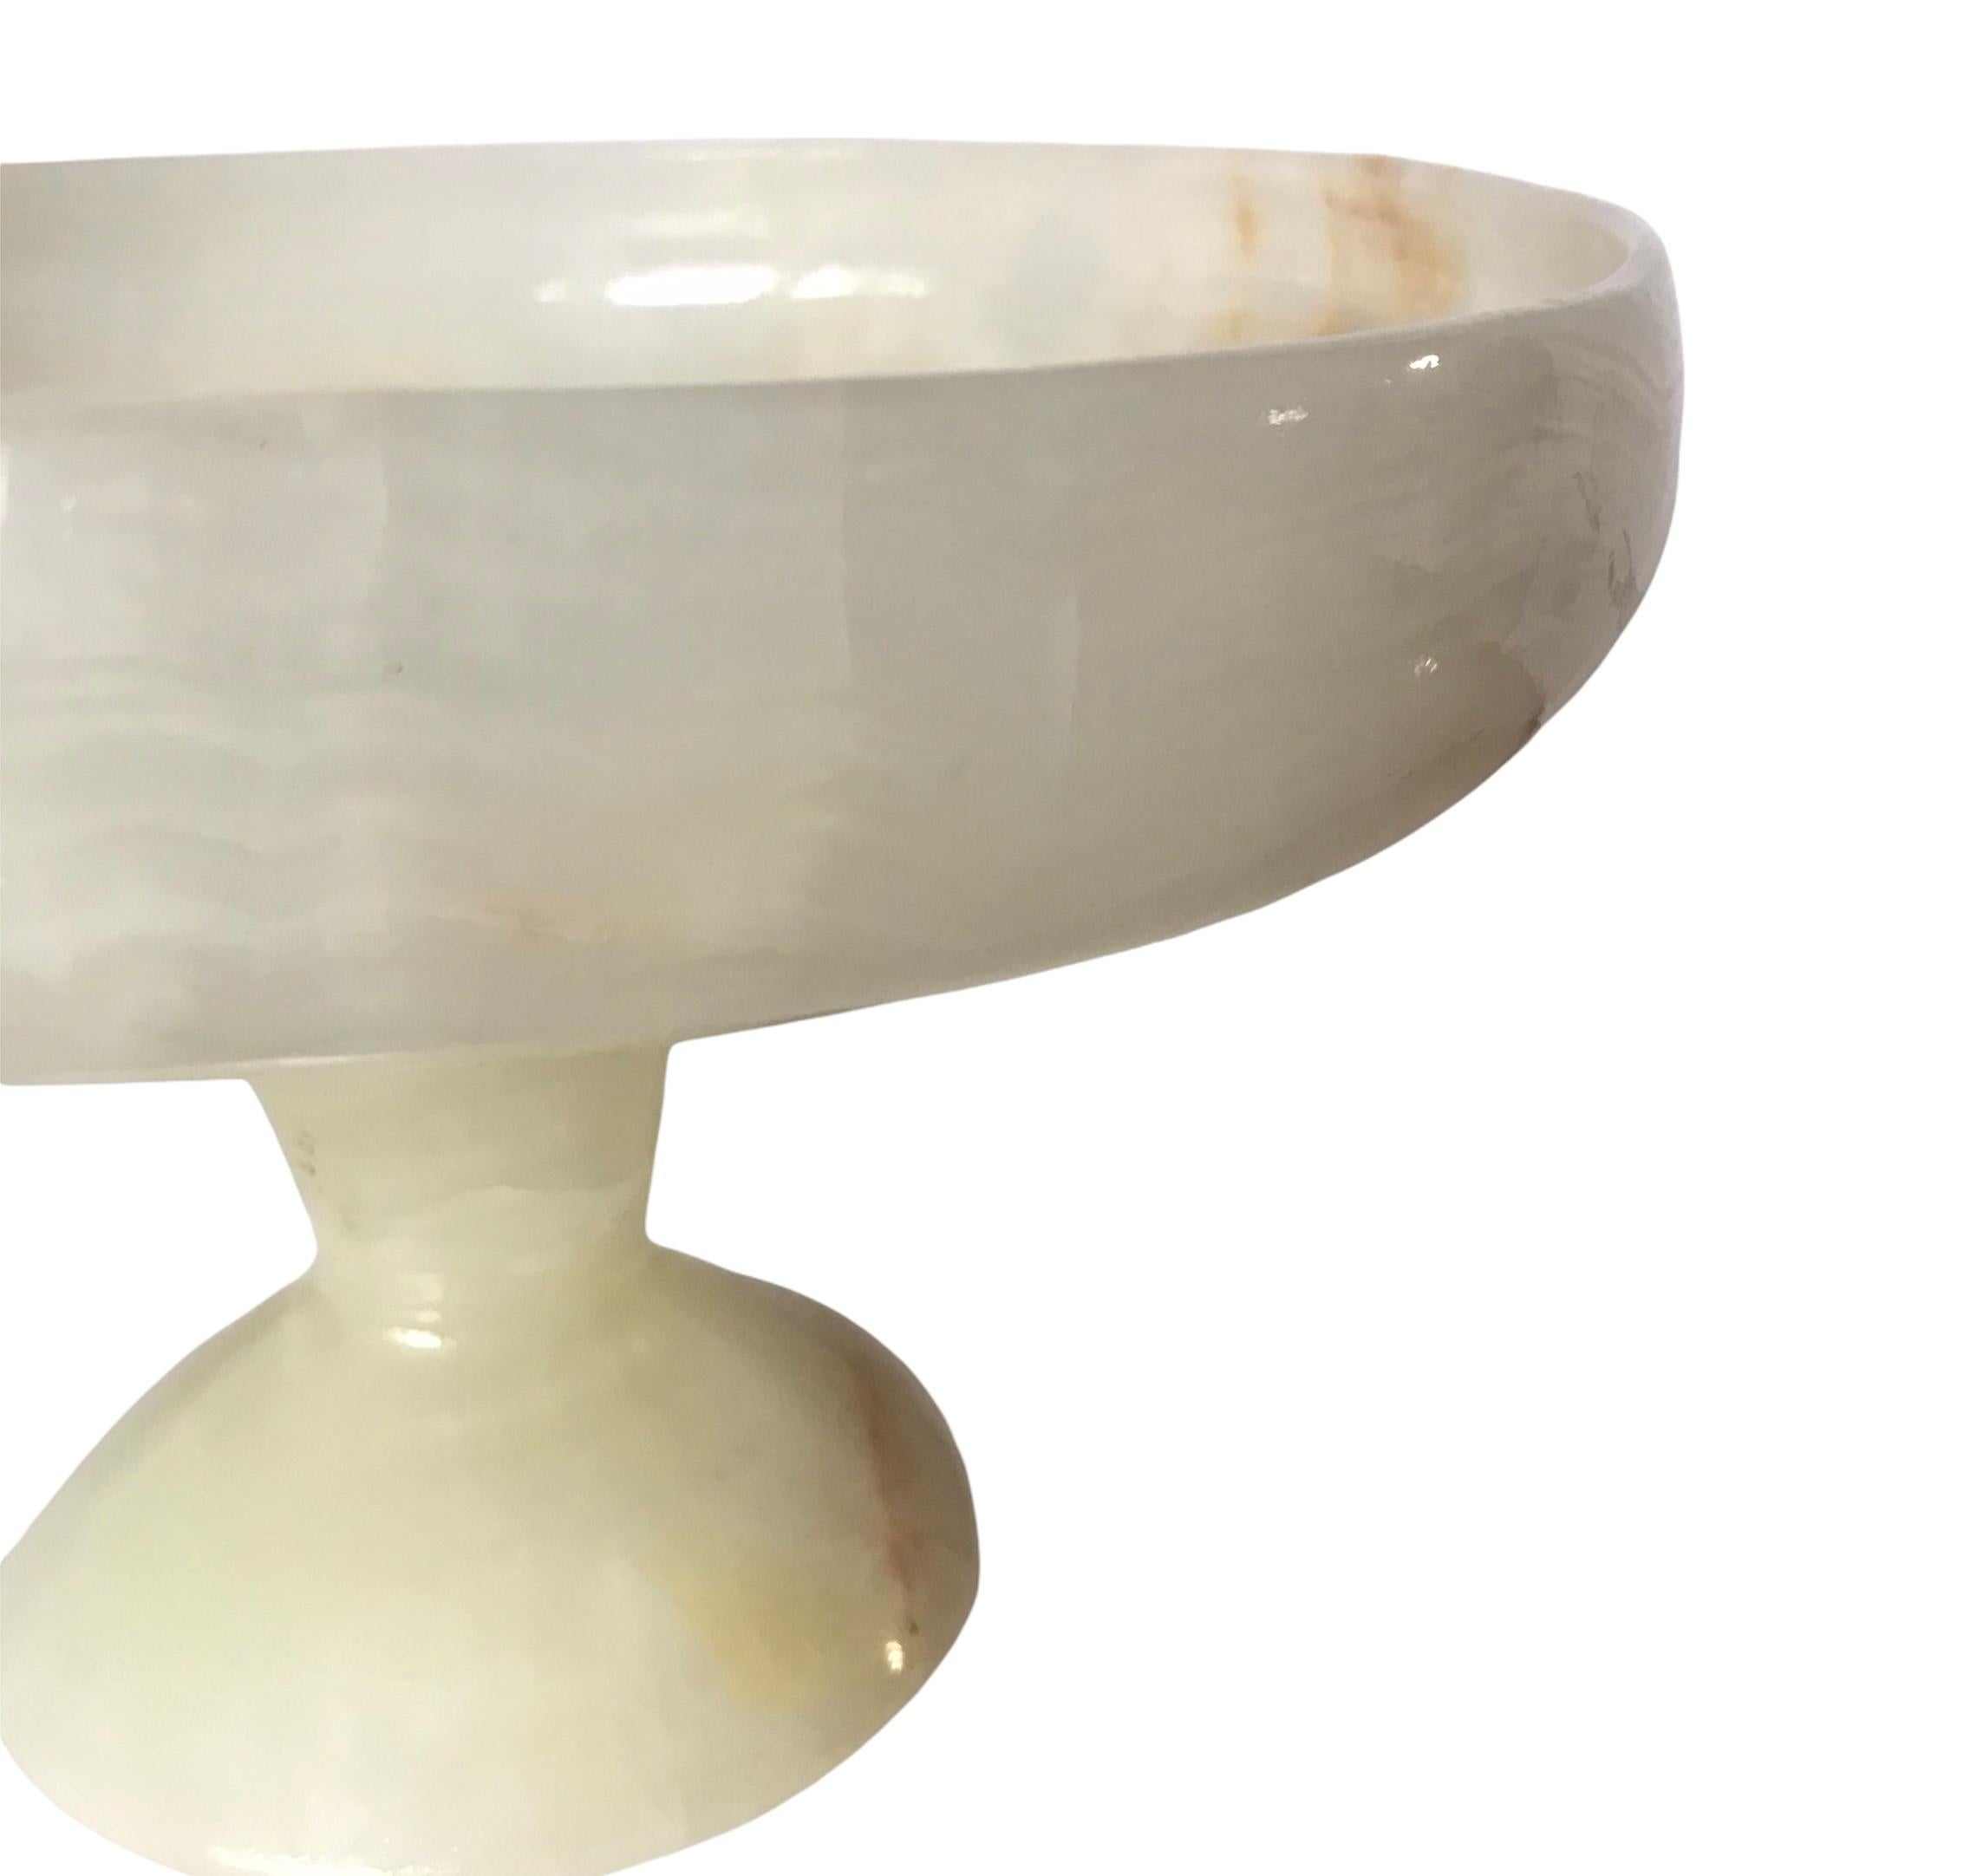 Natural hand carved onyx bowl perched on a pedestal. Lovely mix of cream white with highlights of copper brown.